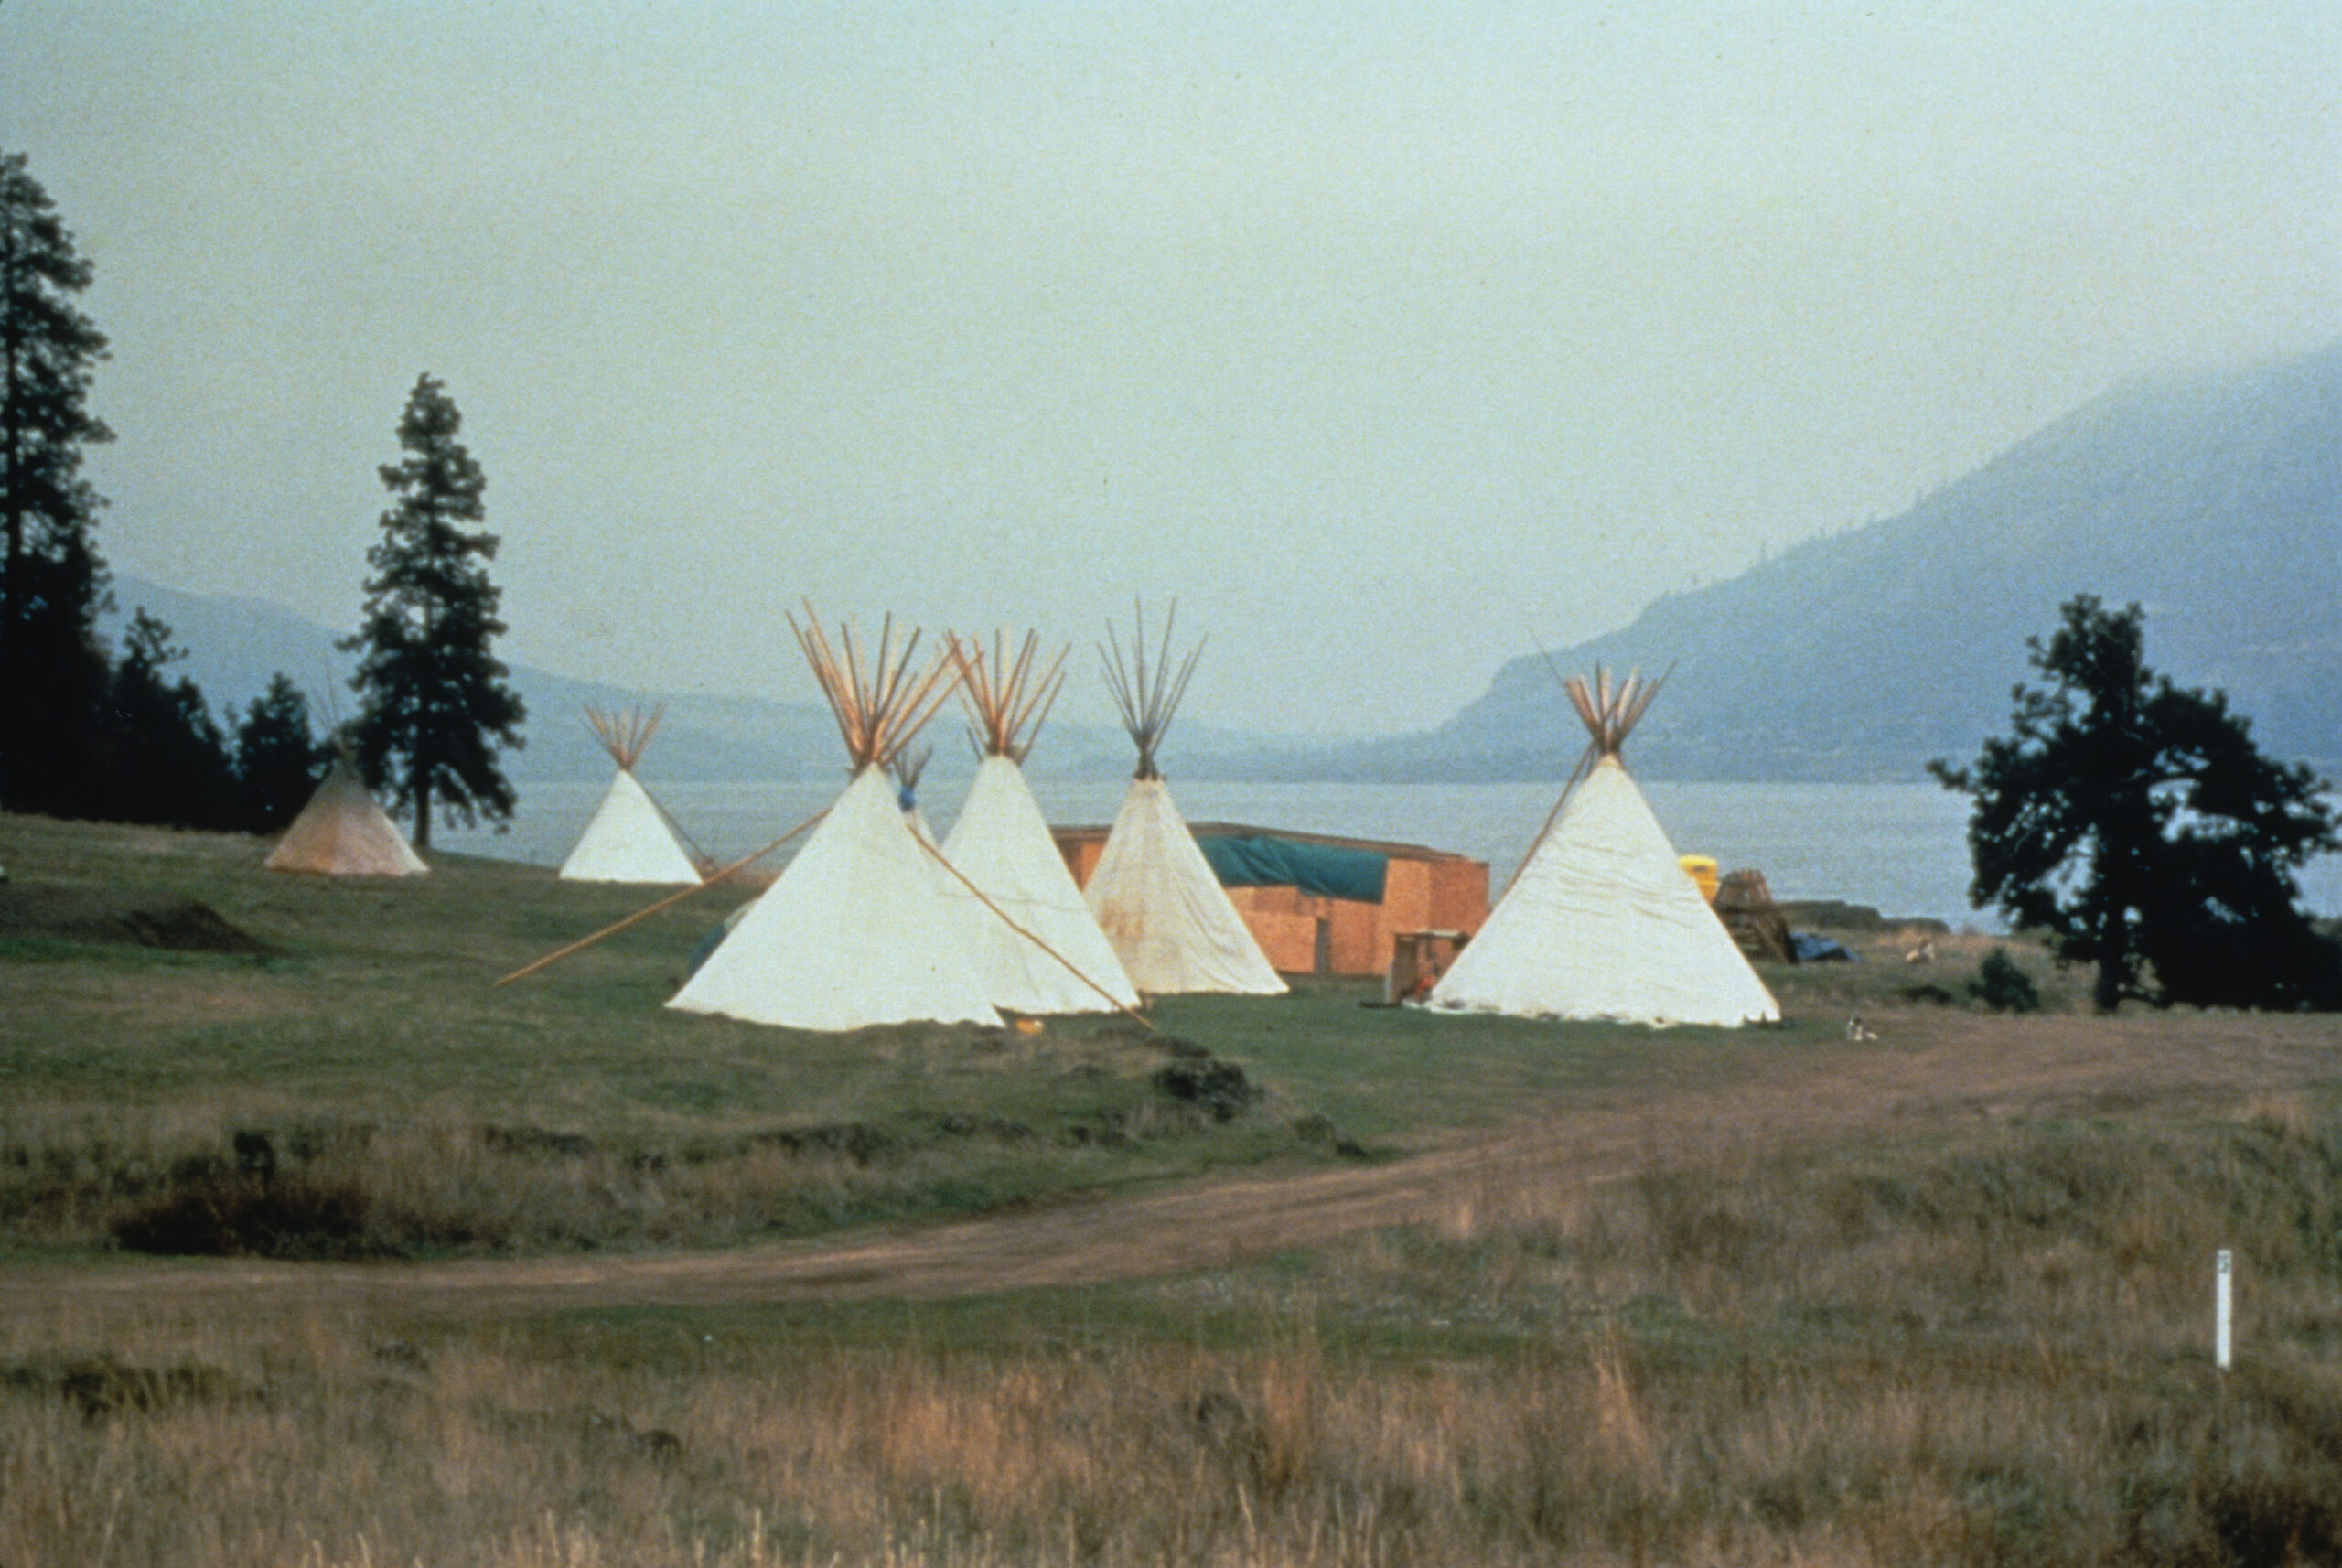 A group of teepees next to a lake.